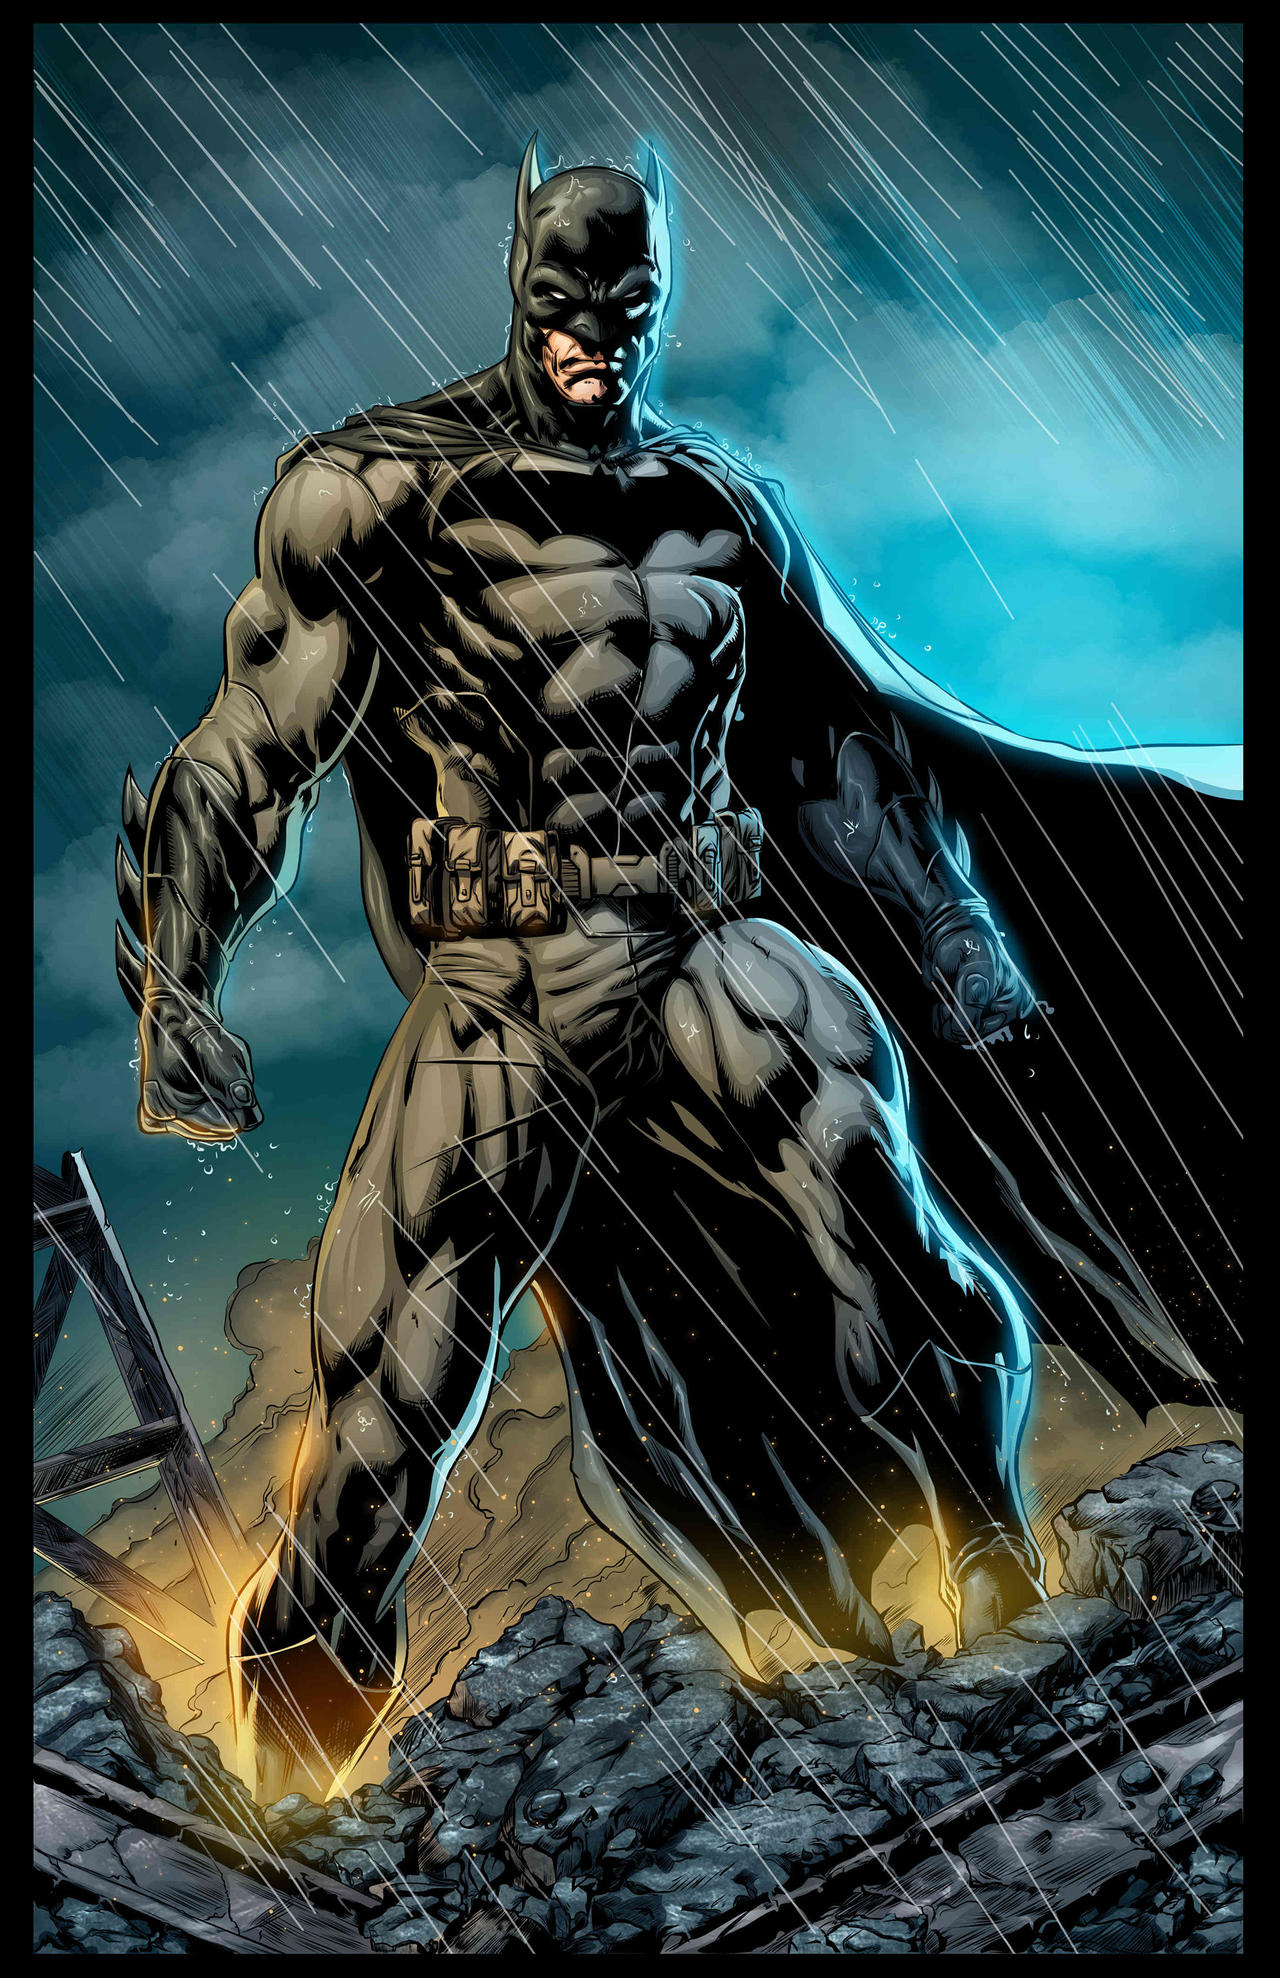 INK AND COLOR TRAINING - BATMAN by digcolors on DeviantArt